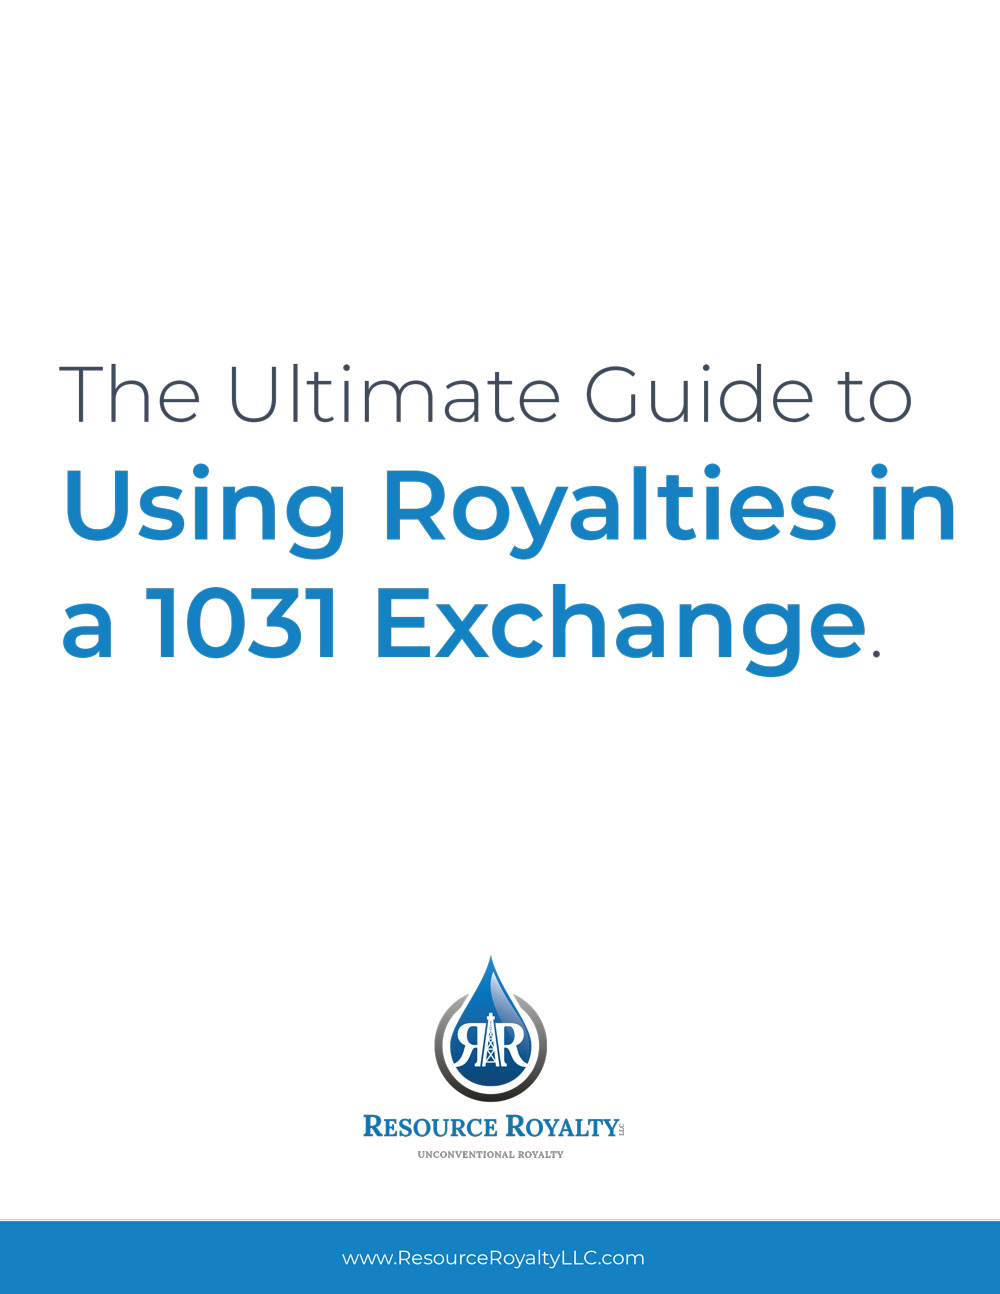 The-Ultimate-Guide-to-Using-Royalties-in-a-1031-Exchange-(1)-1-cover-1000